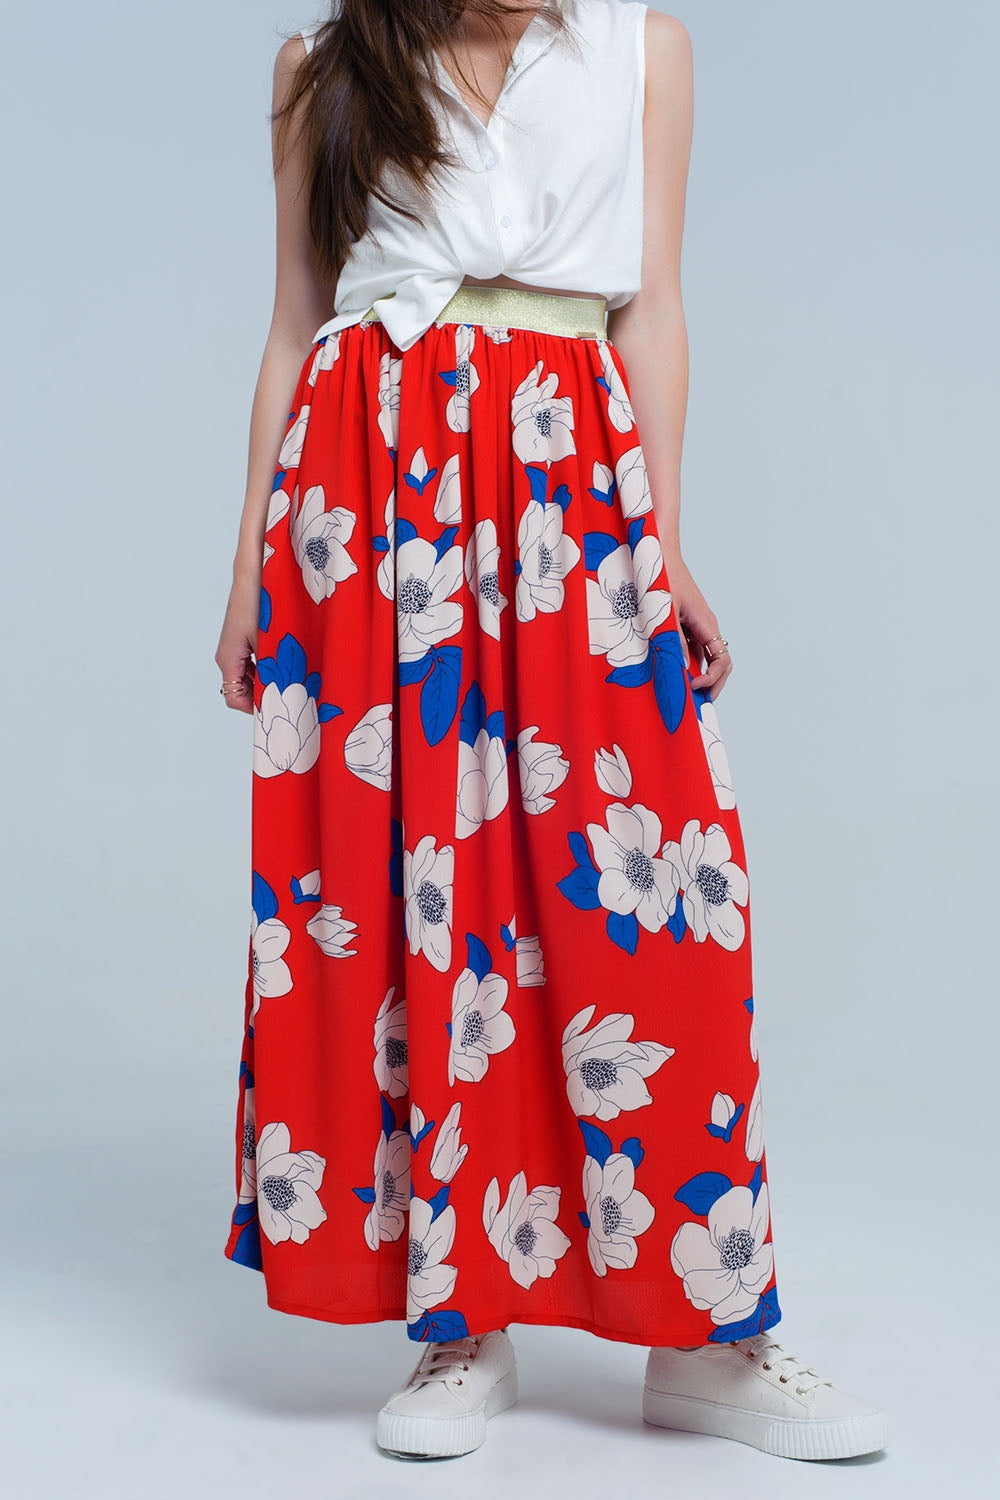 Q2 Red long skirt with printed flowers